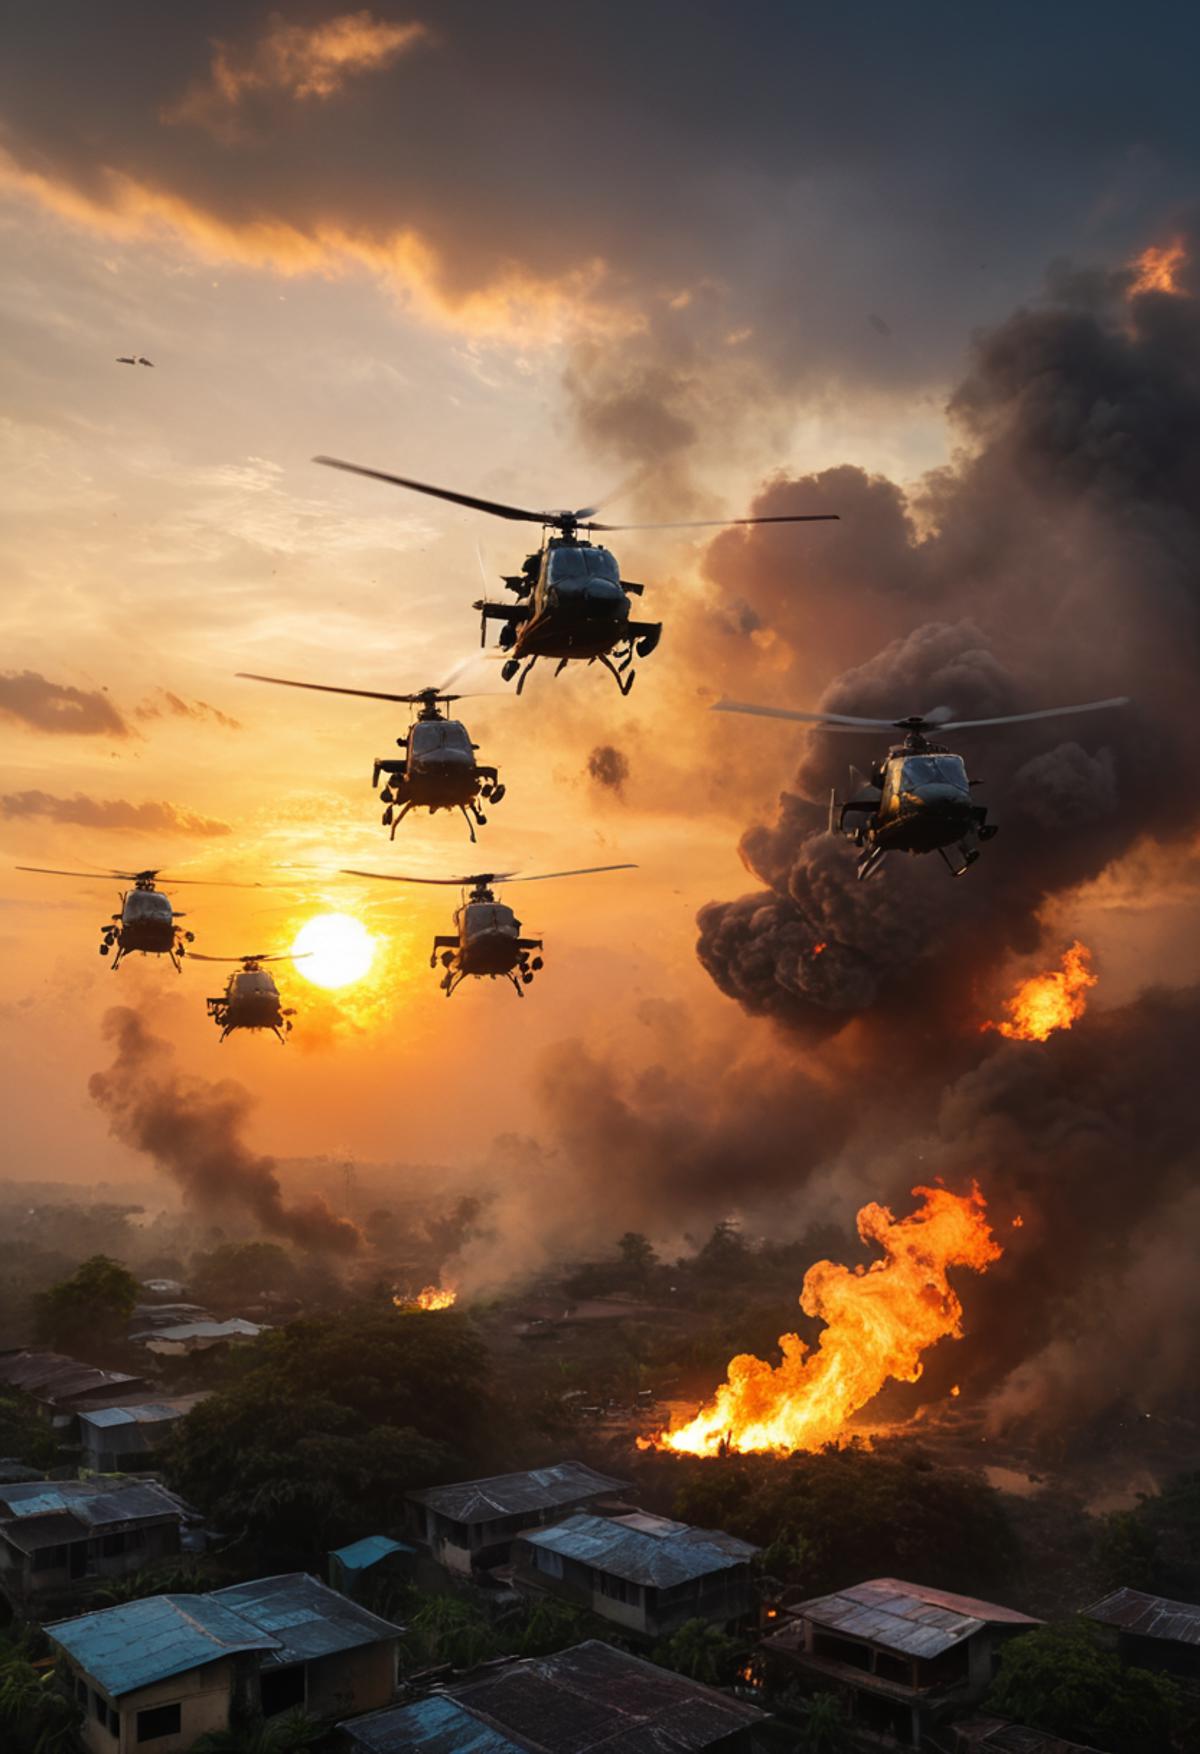 A group of helicopters flying in formation over a city at sunrise, with clouds of smoke and flames below them.